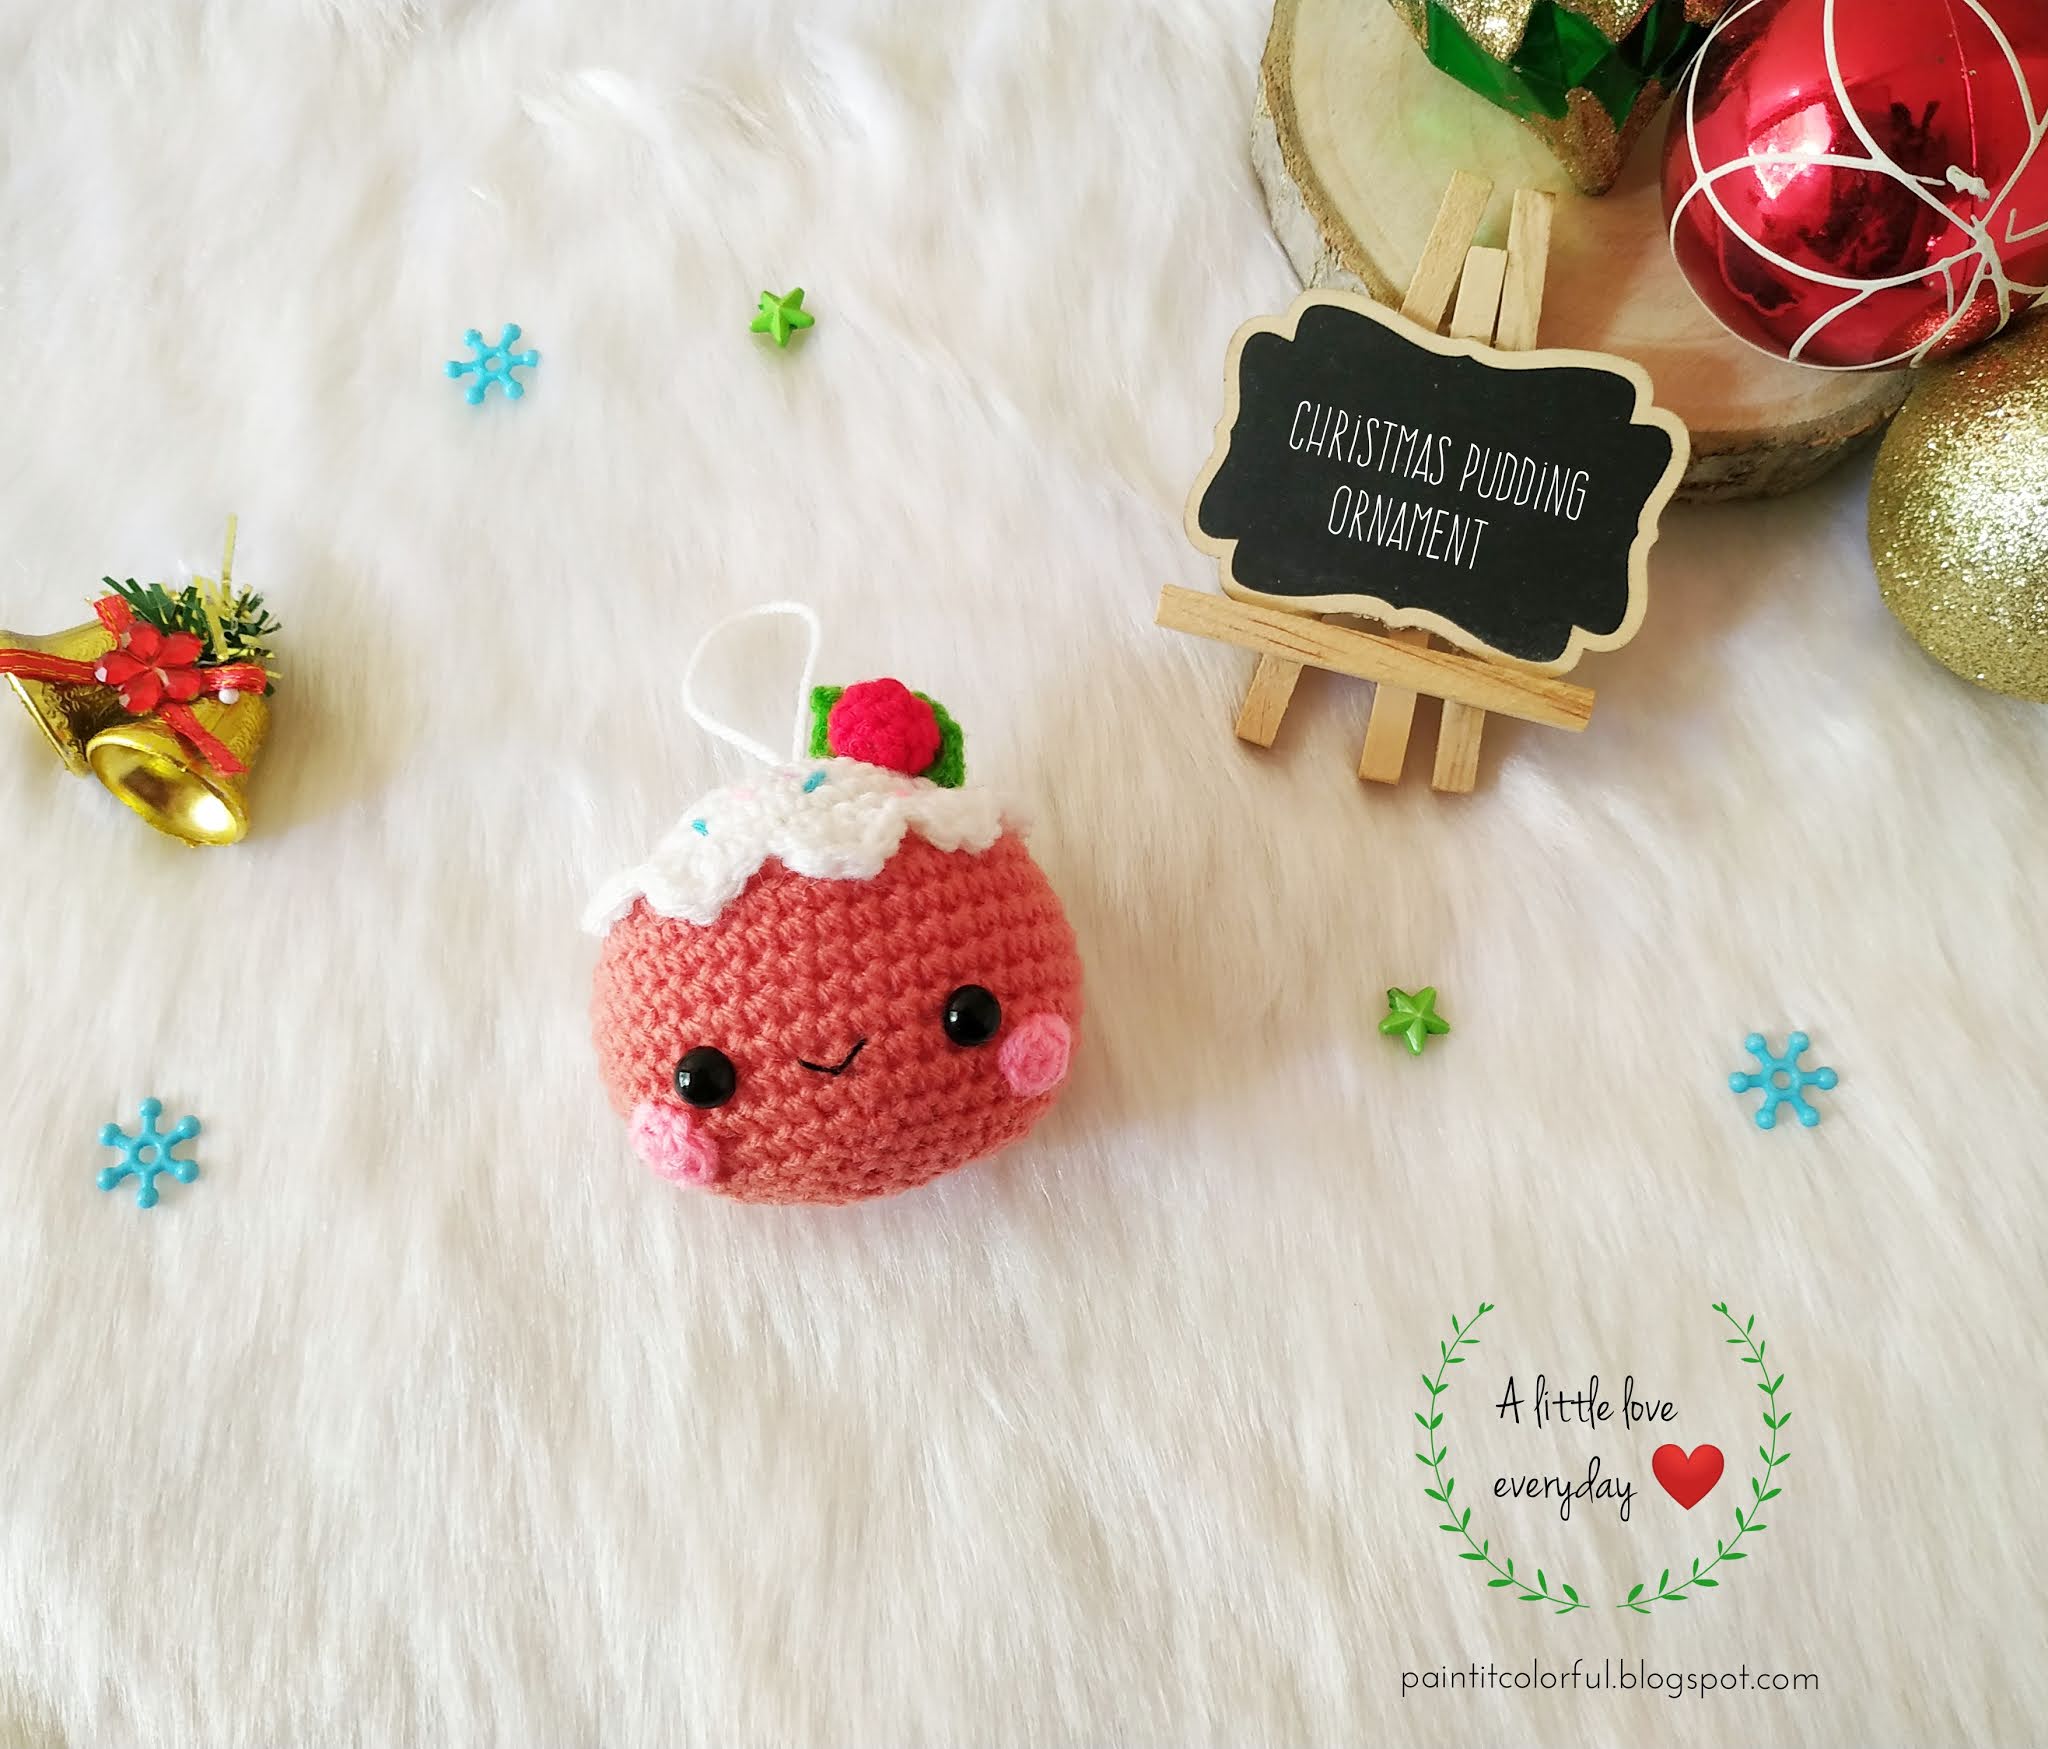 Christmas pudding ornament pattern. - A little love everyday!